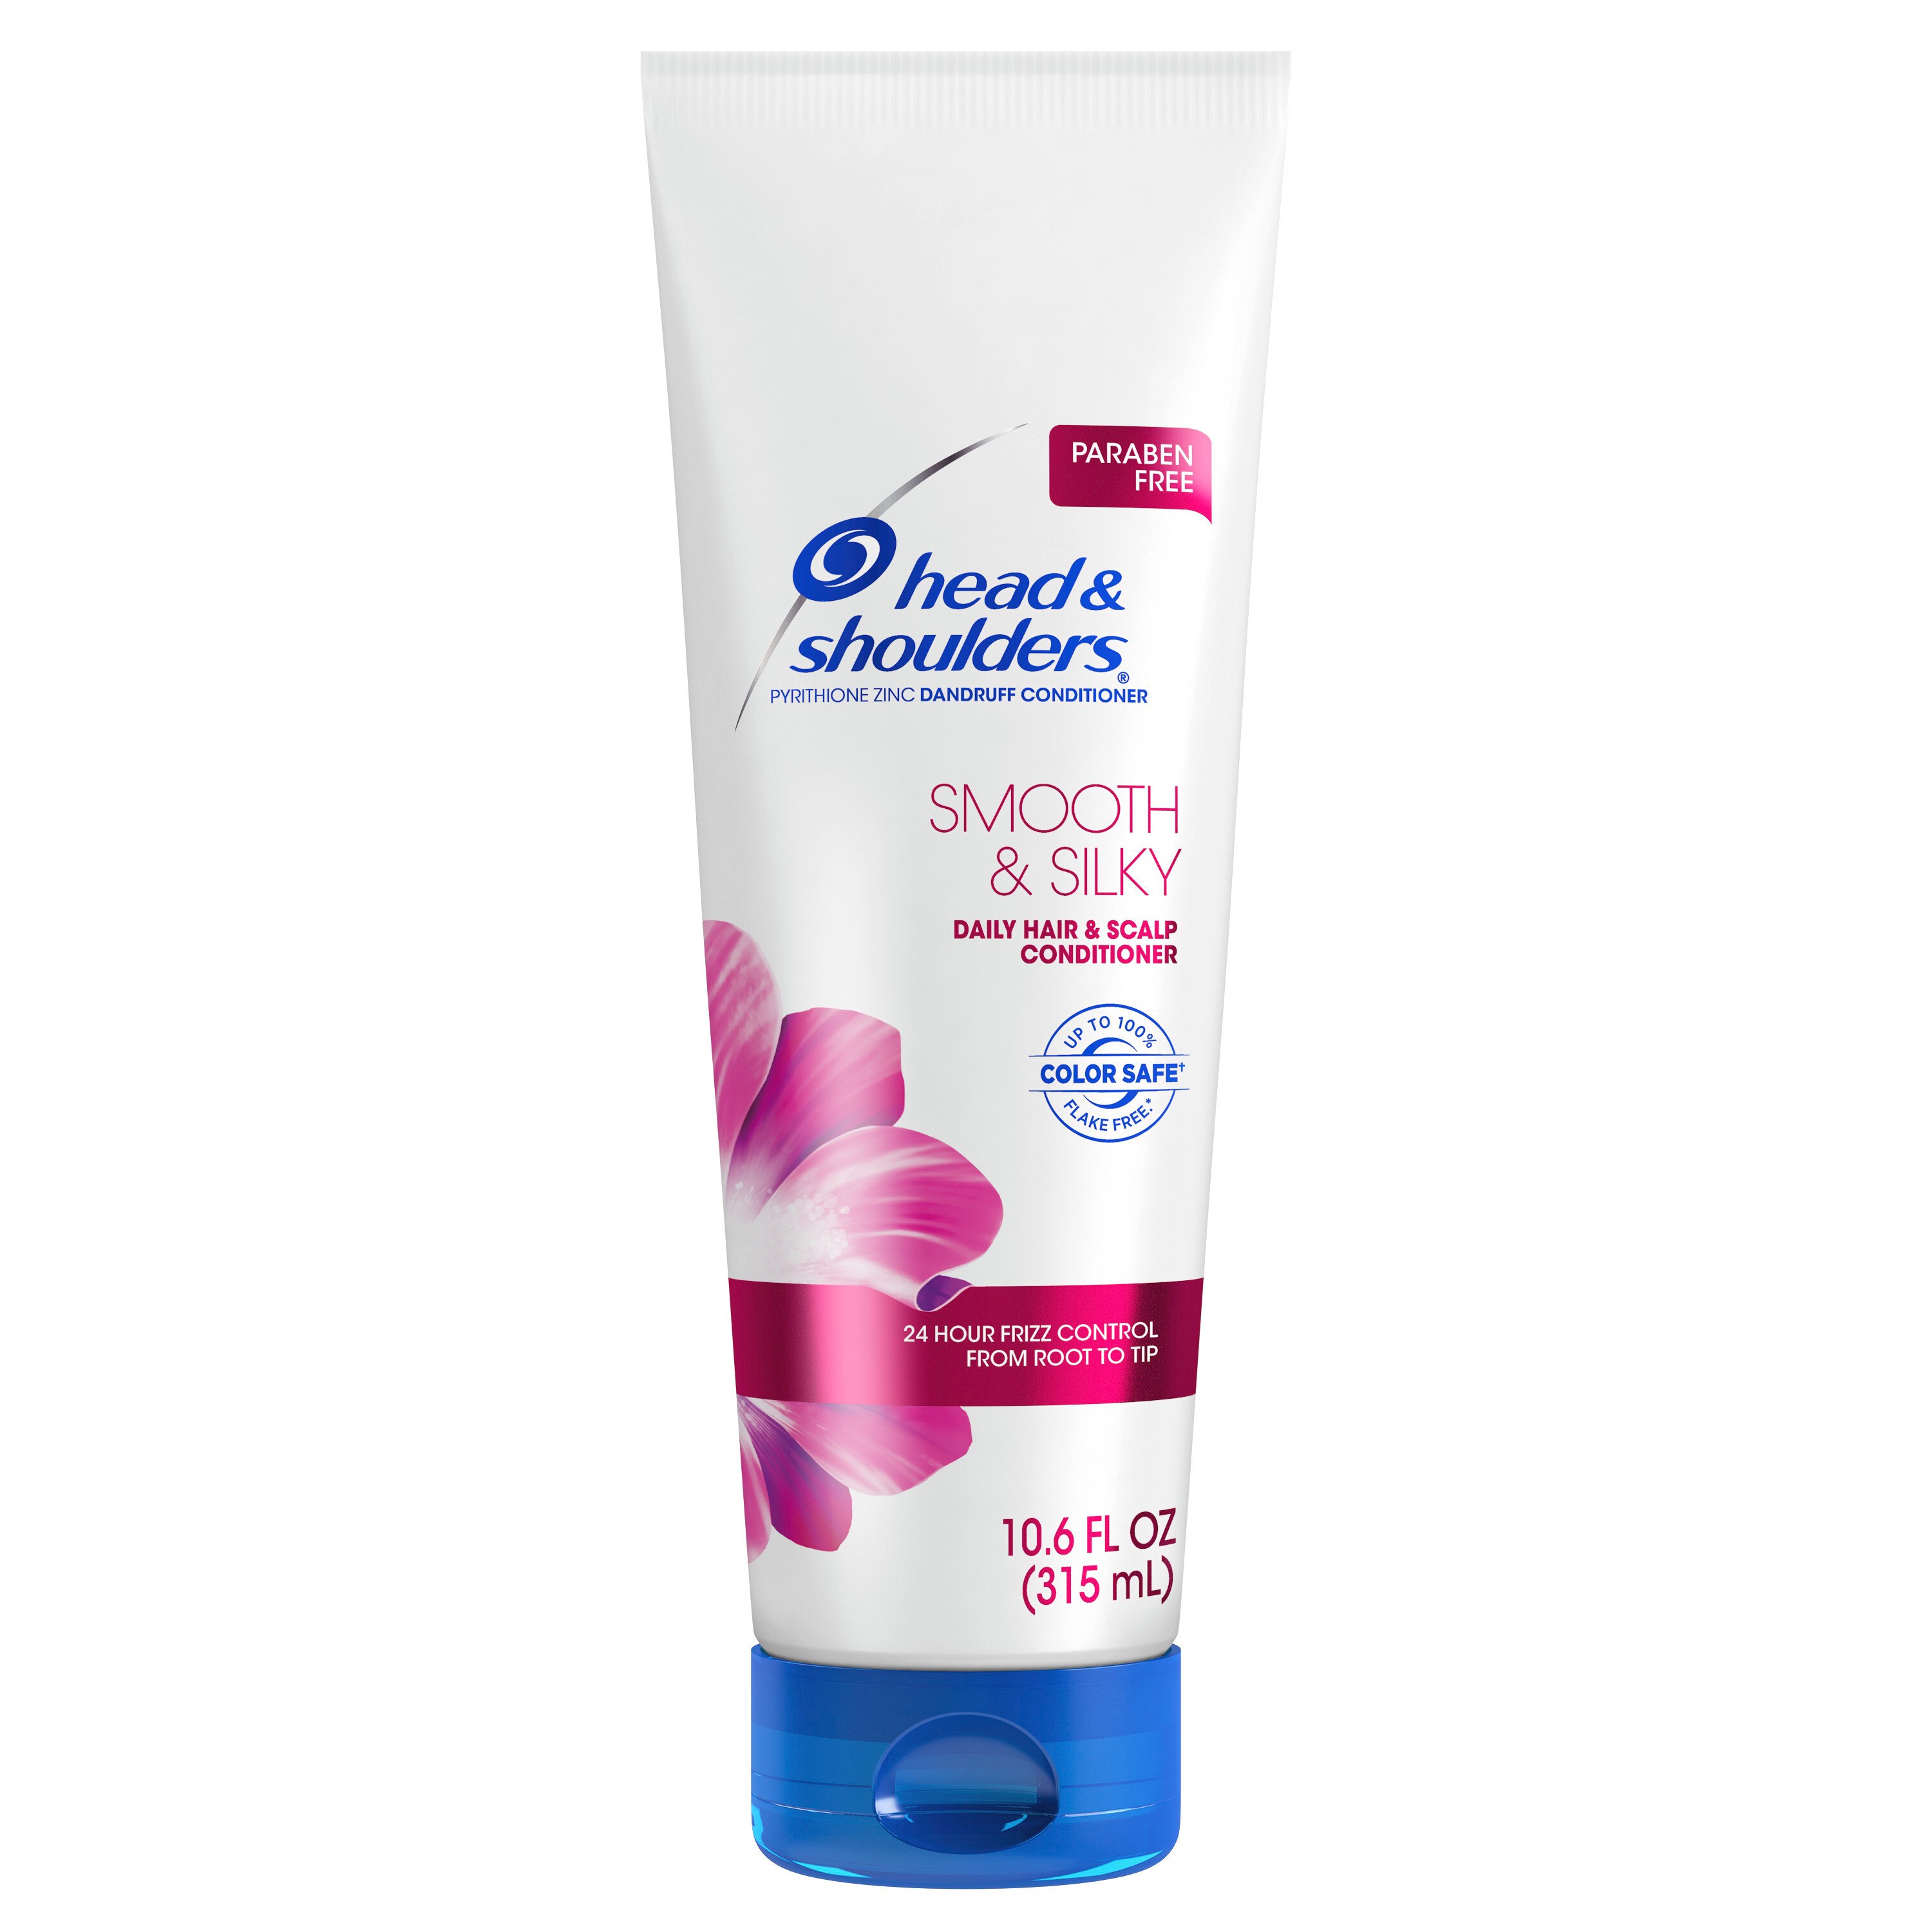 Head and Shoulders Smooth and Silky Paraben Free Dandruff Conditioner, 10.6 OZ